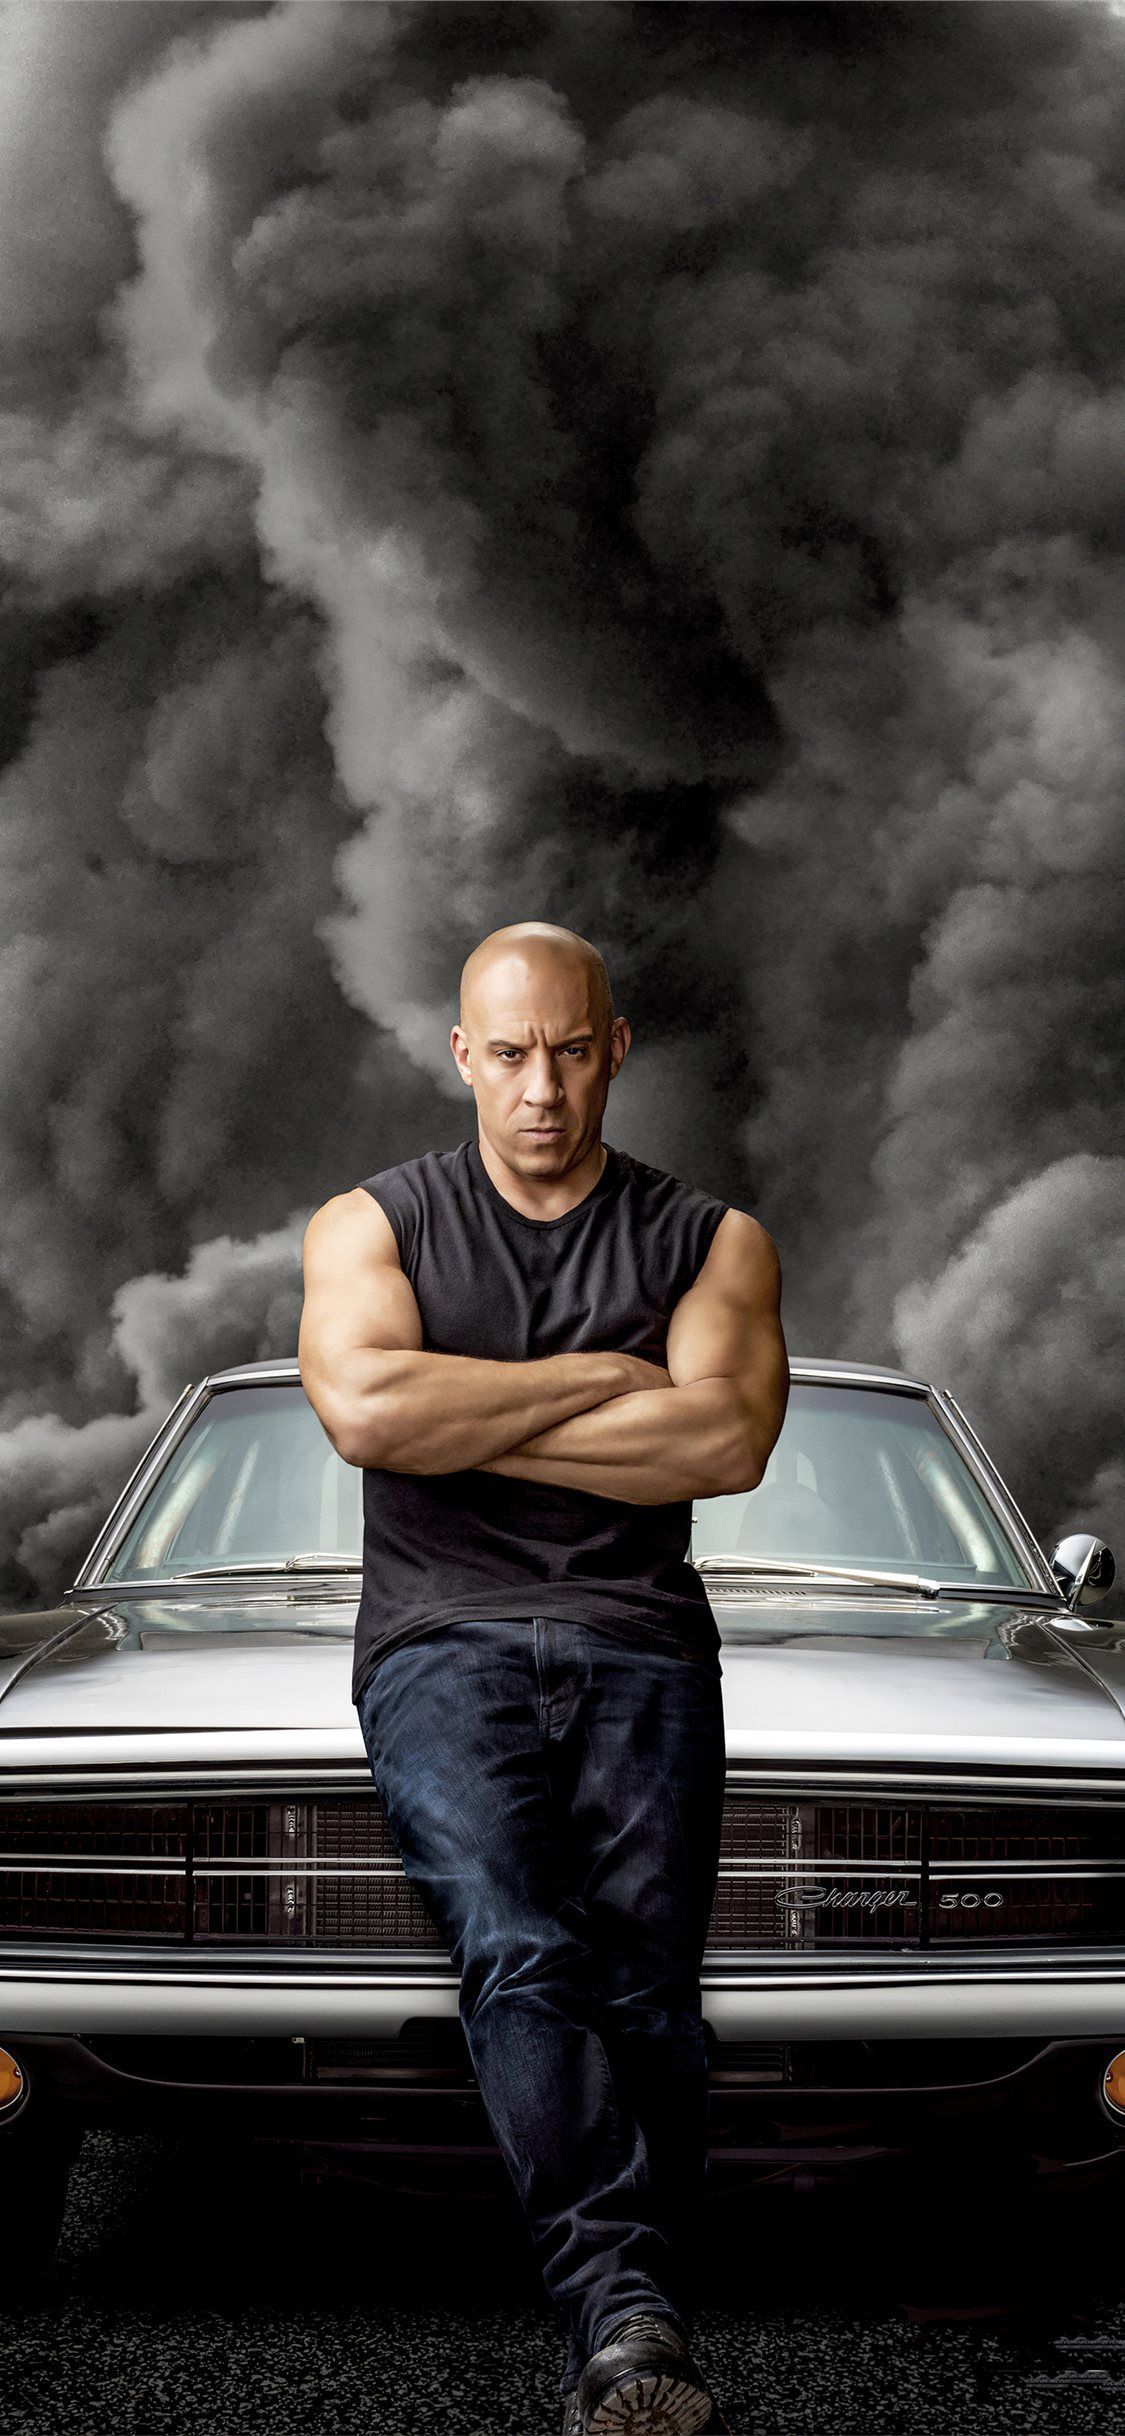 Free download the dominic toretto in fast and furious 9 2020 movie wallpaper , beaty your iphone. #Fast And Furious 9. Fast and furious, 2020 movies, Vin diesel